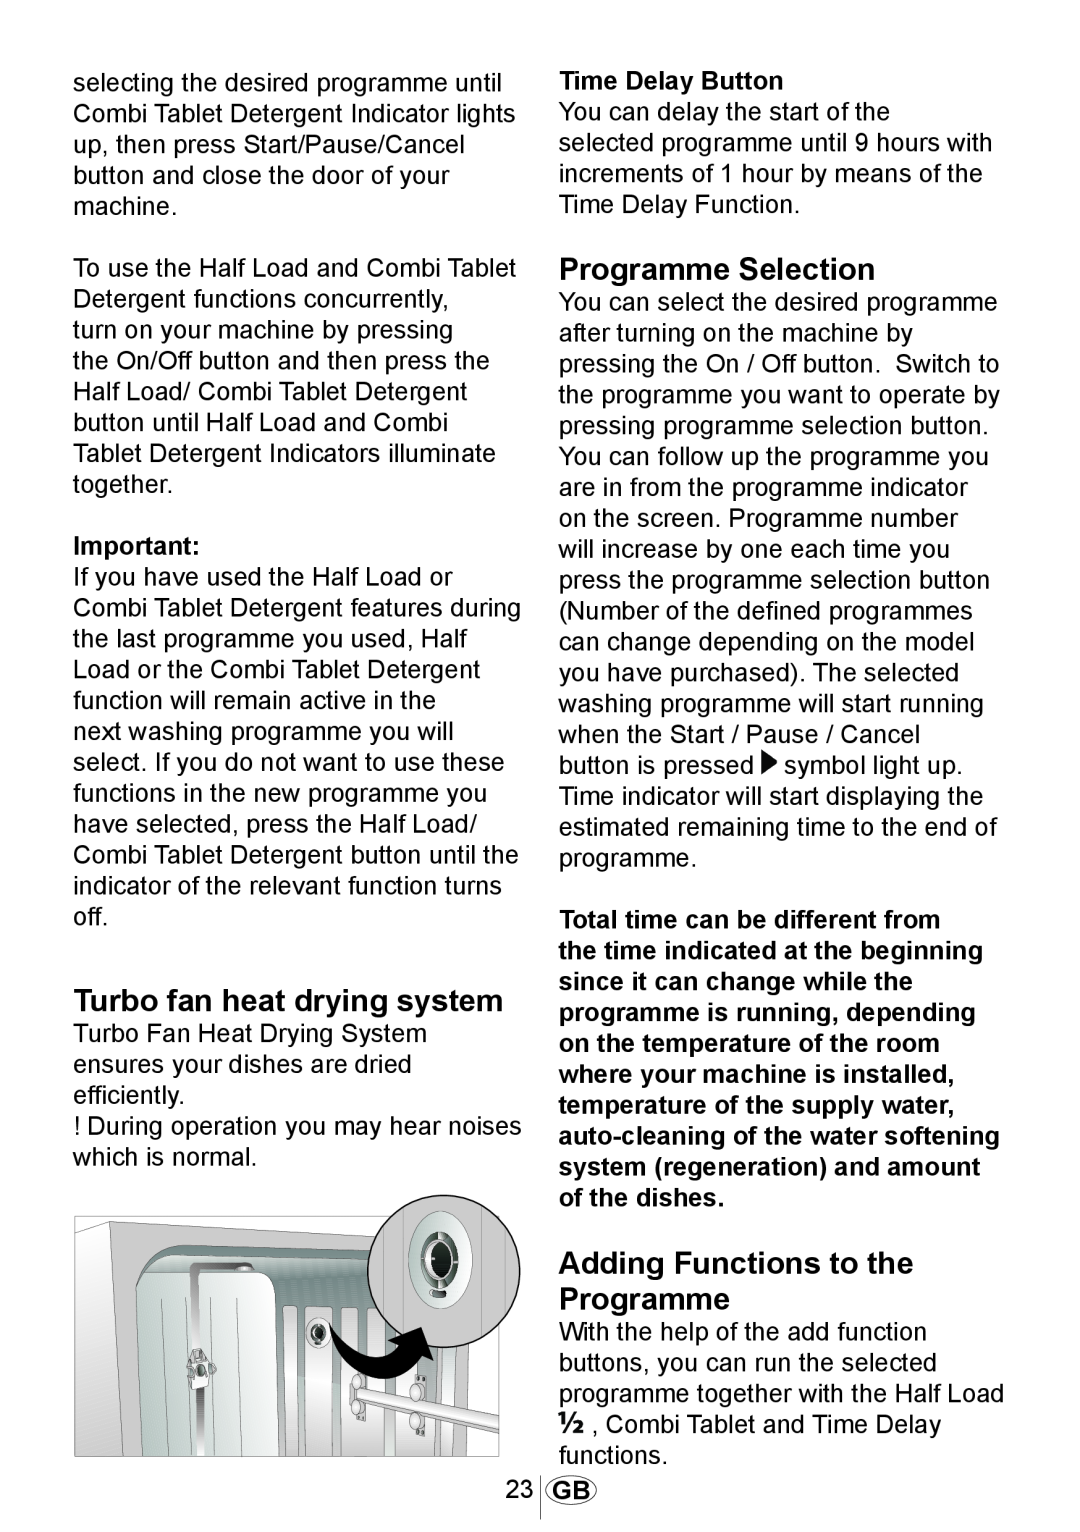 Beko DSFN 6830 Turbo fan heat drying system, Programme Selection, Adding Functions to the Programme, Time Delay Button 